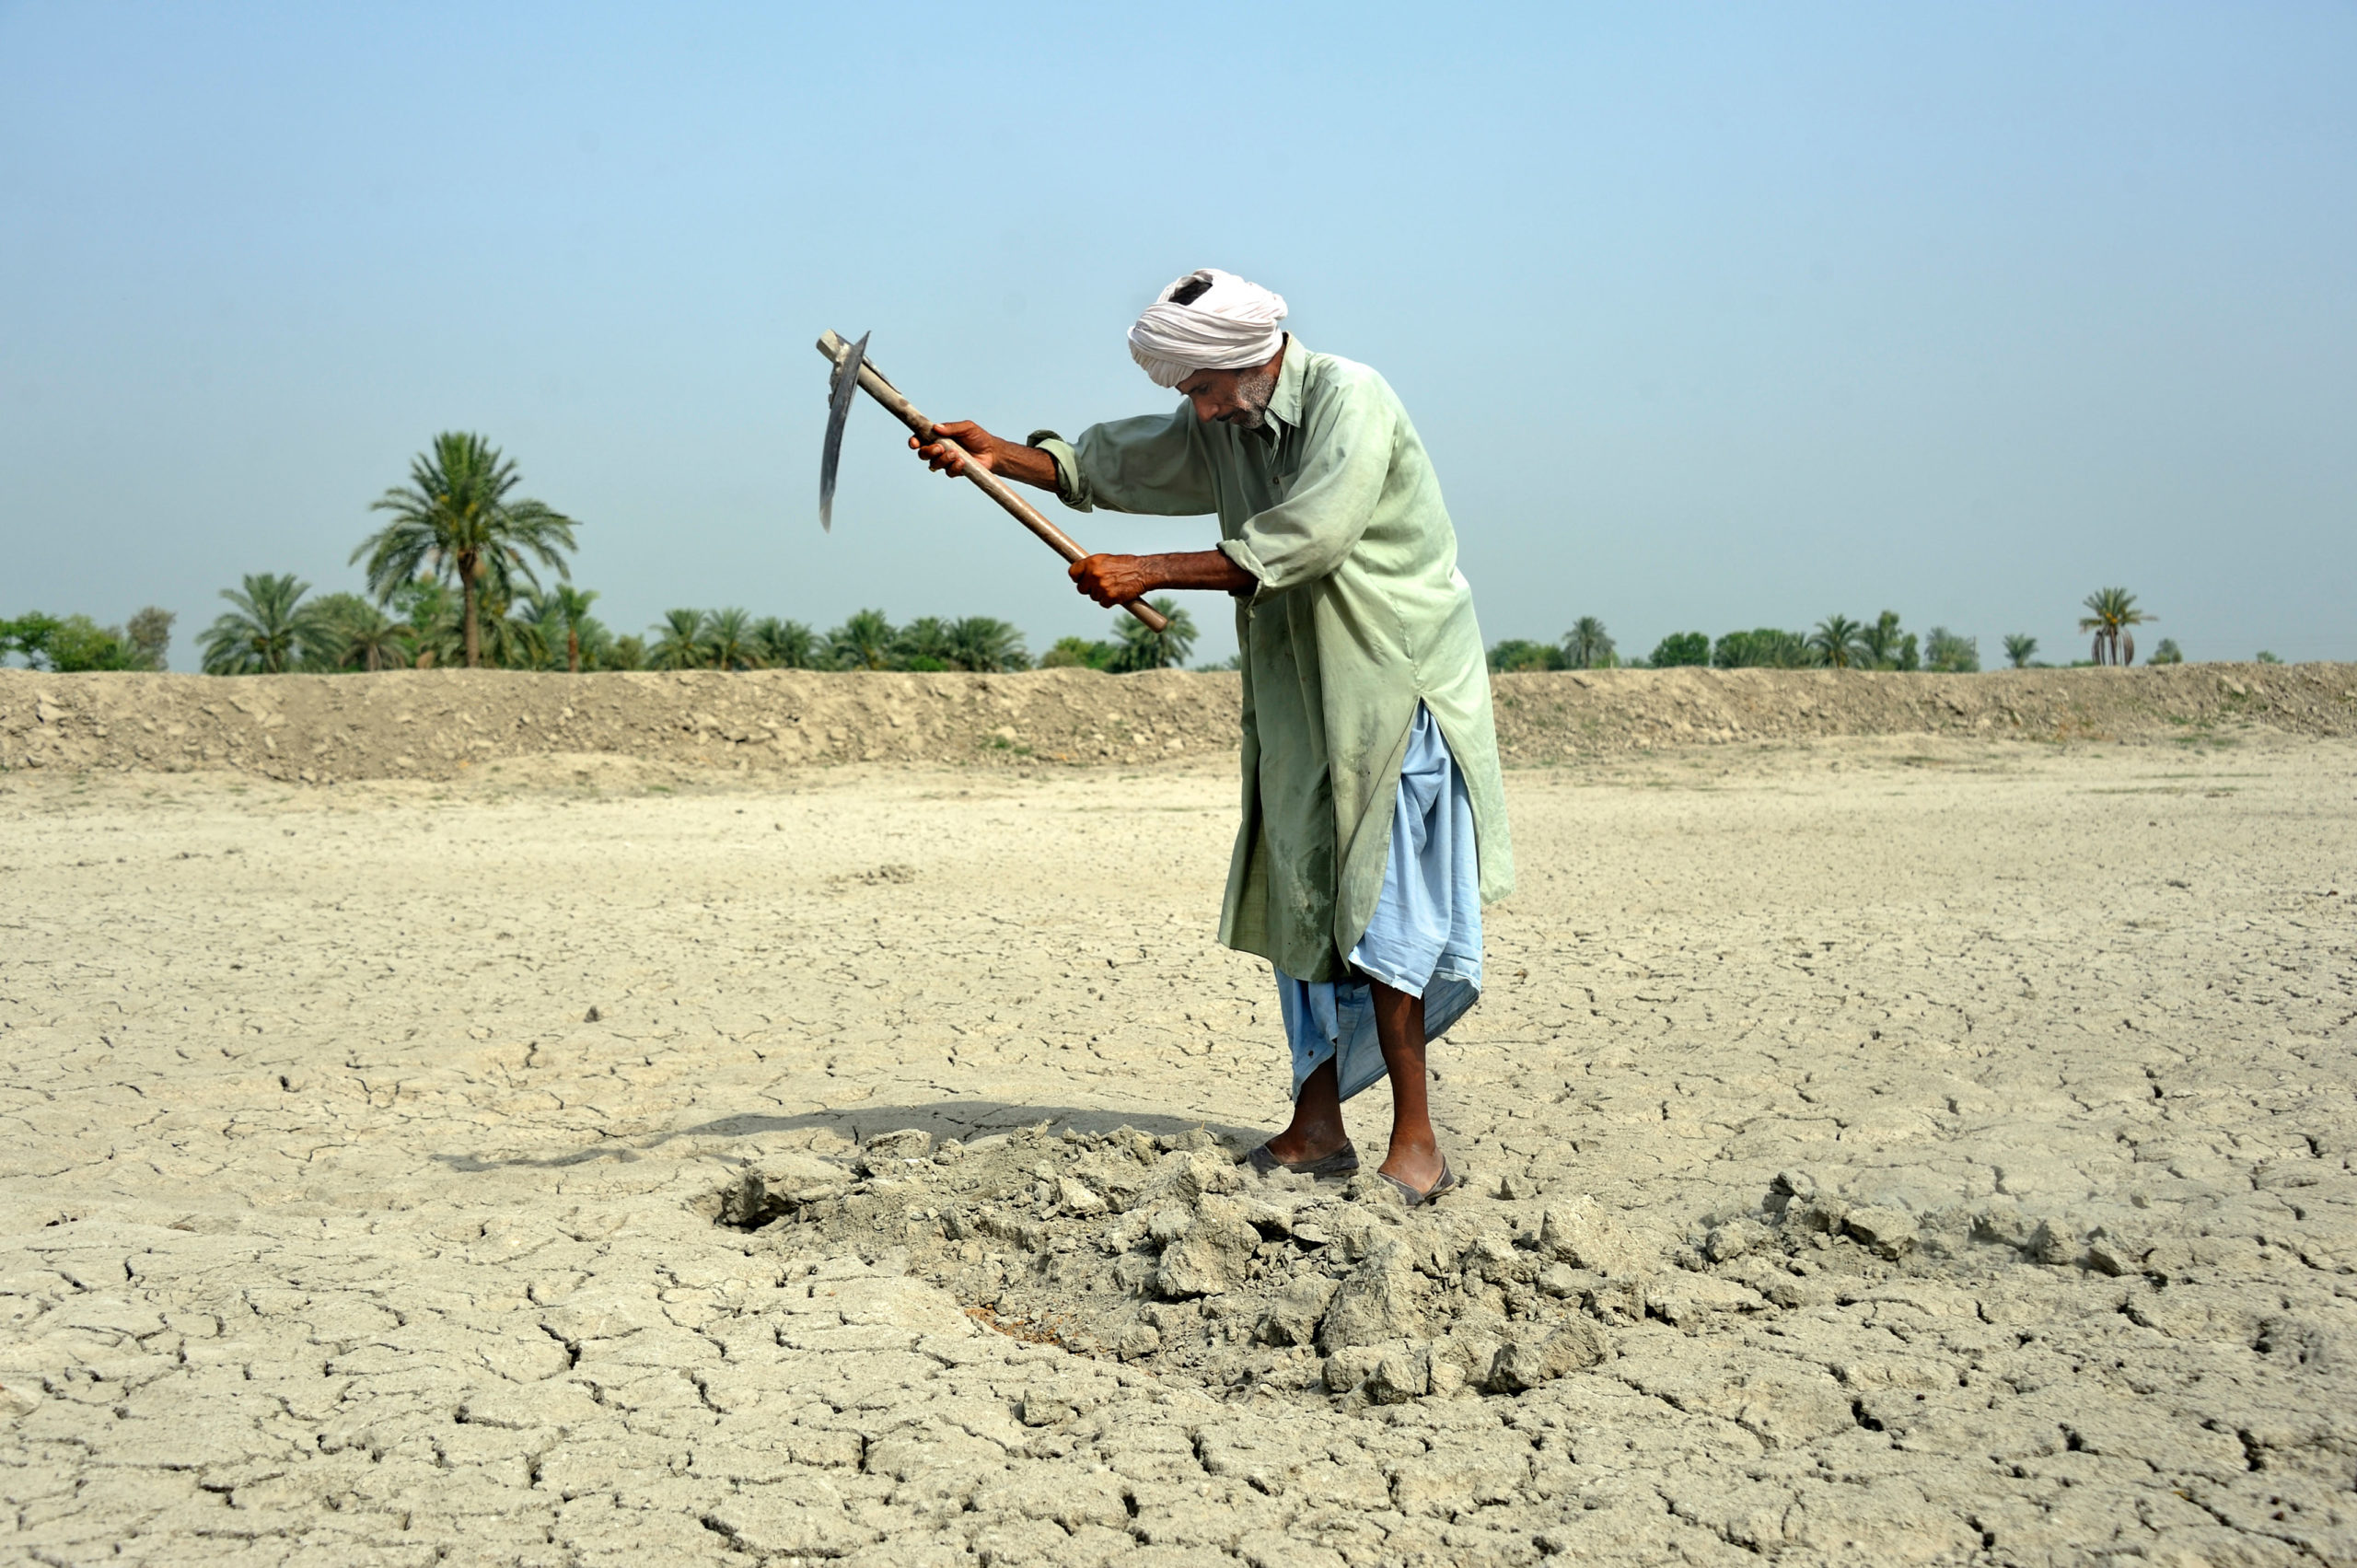 A farmer working on dry soil in Basti Lehar Walla, Pakistan. Climate change is driving more extreme weather, including droughts, in South Asia.